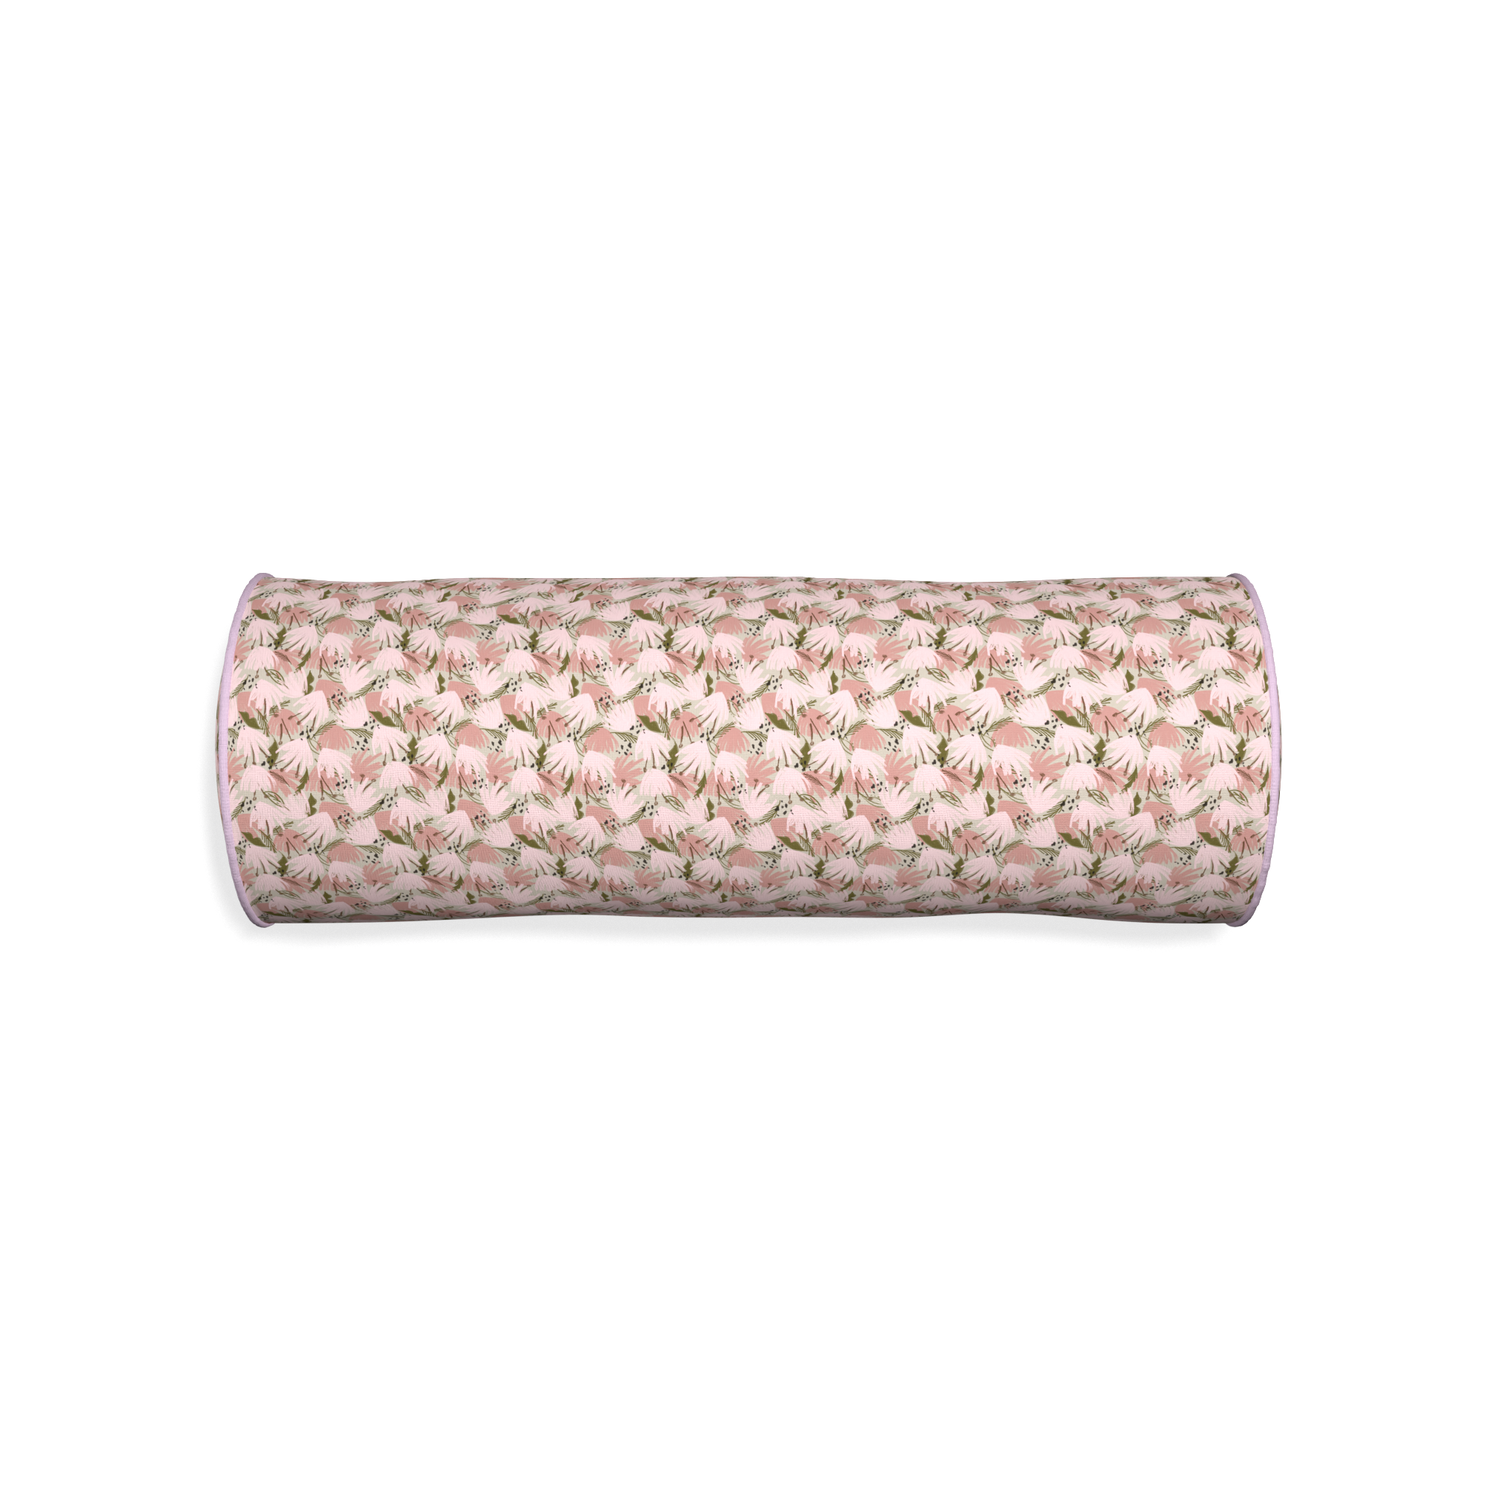 Bolster eden pink custom pink floralpillow with l piping on white background